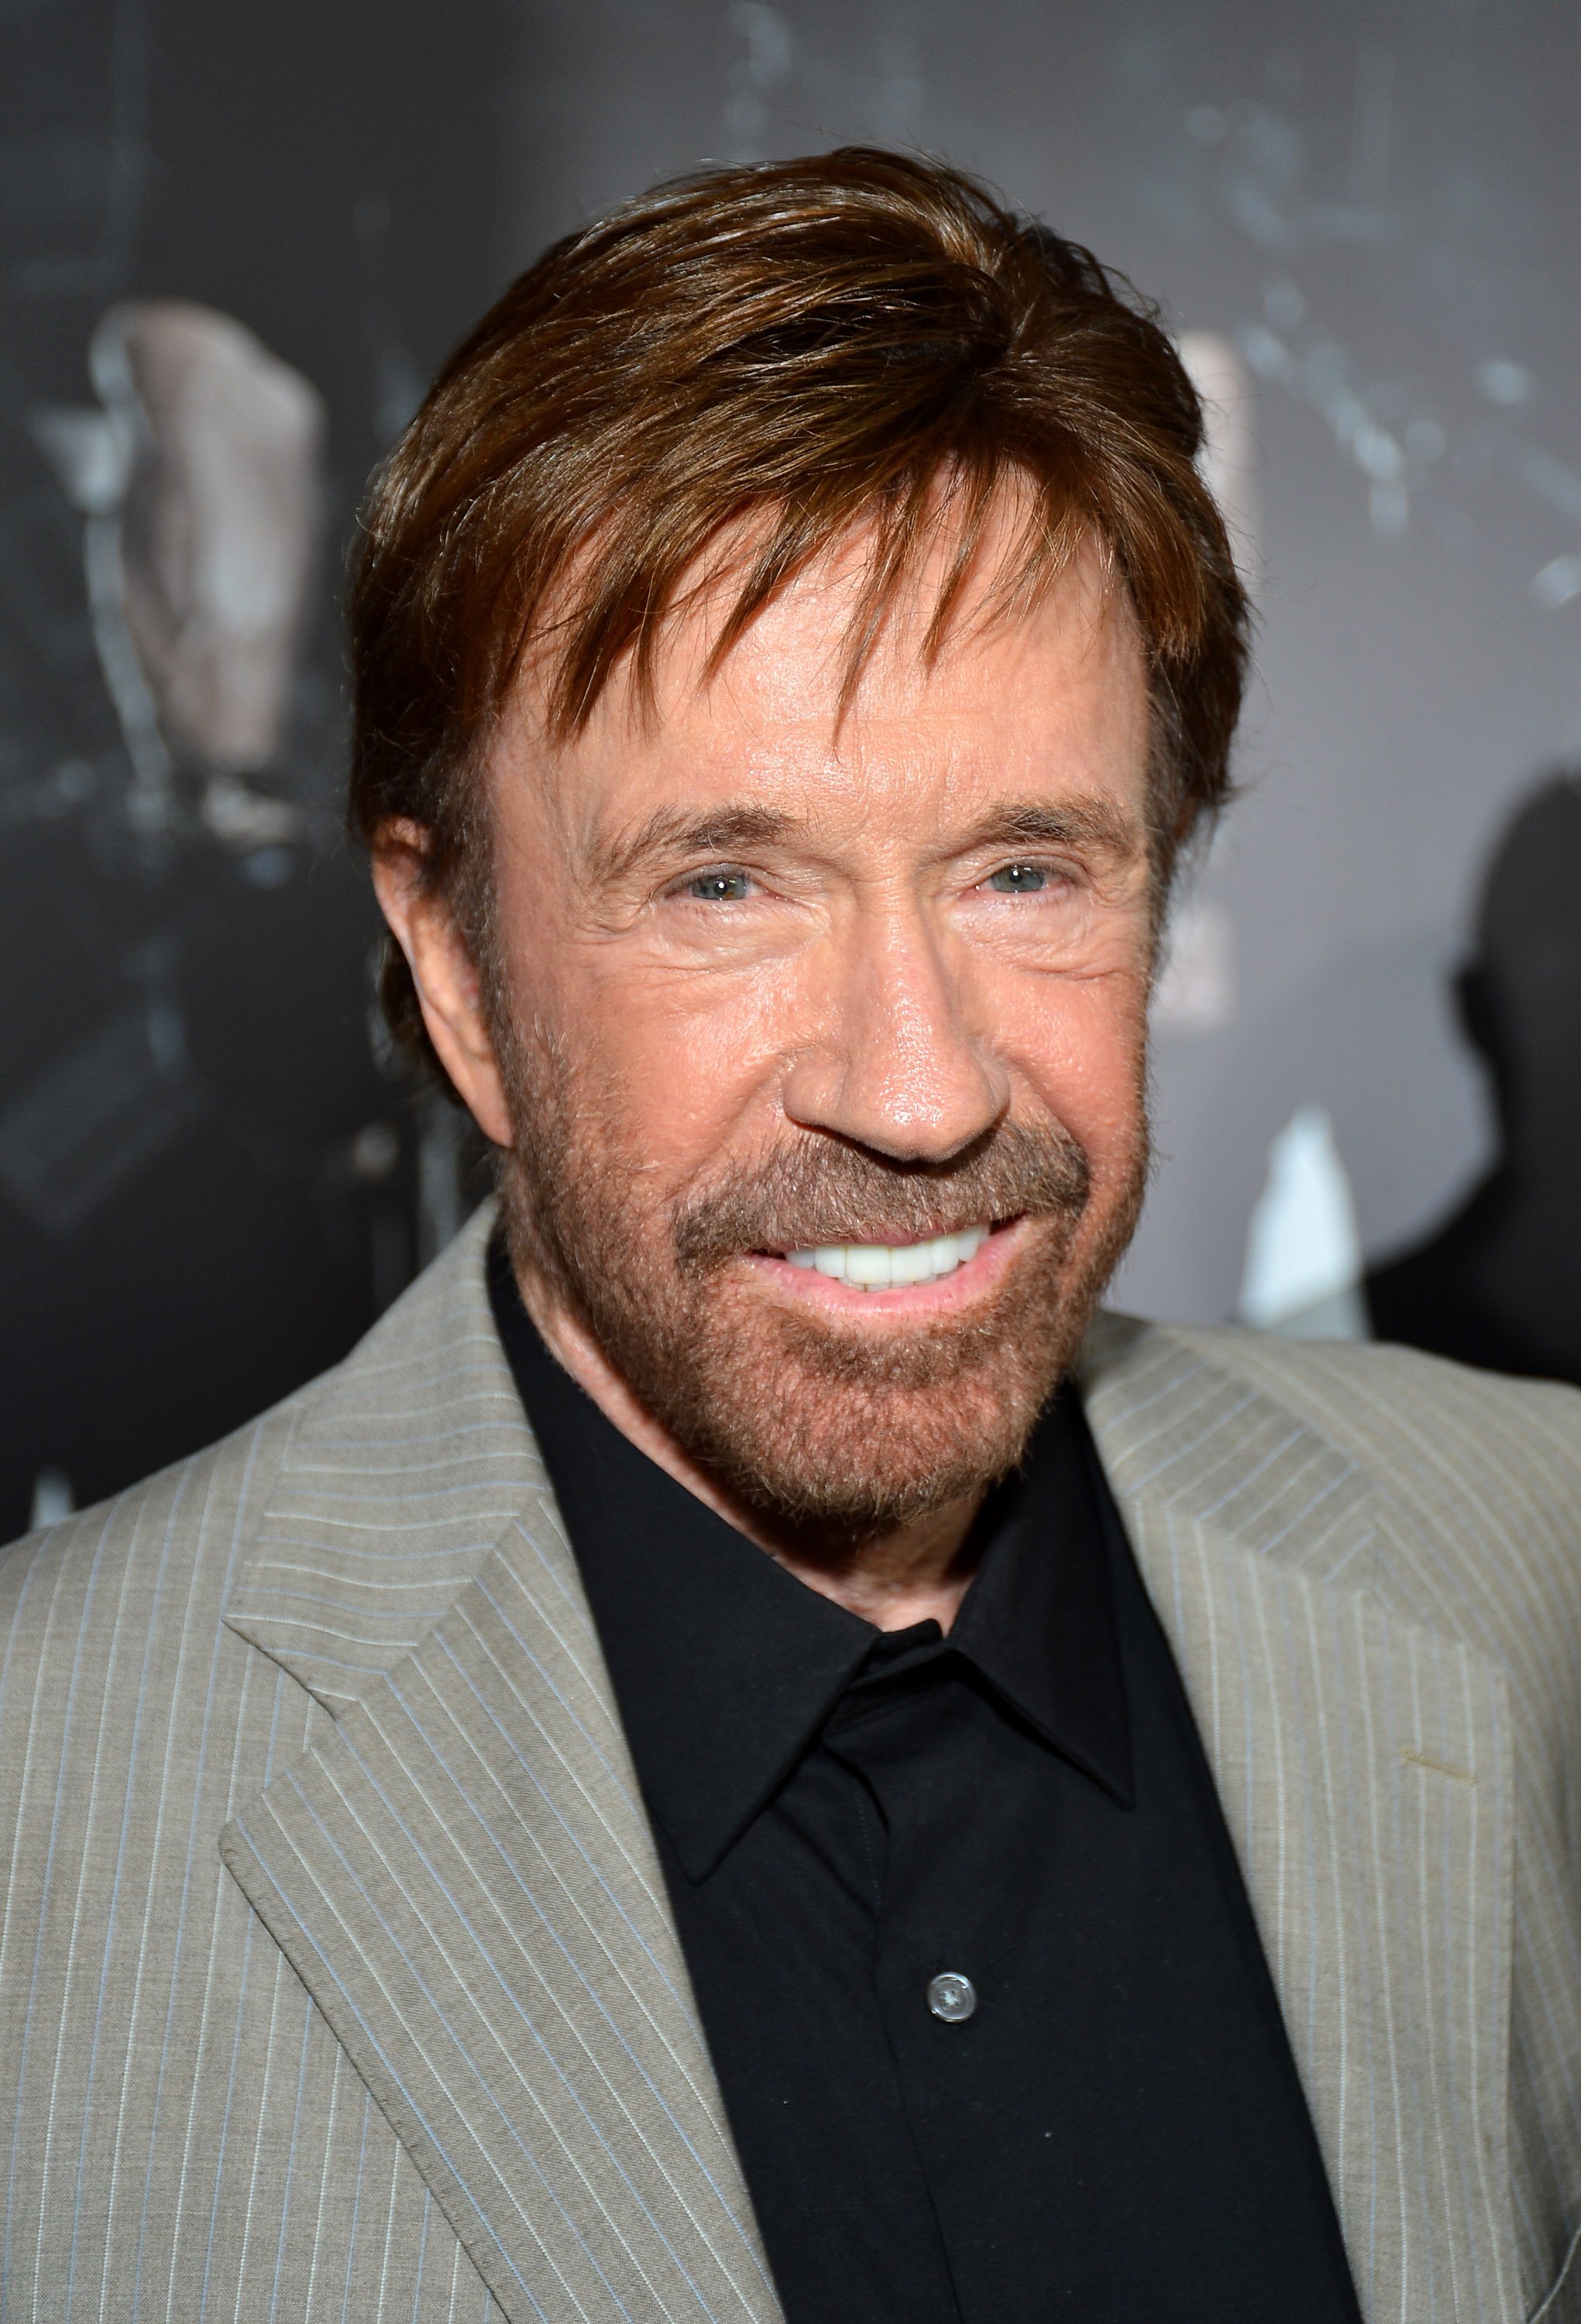 Chuck Norris attends the "The Expendables 2" premiere on August 15, 2012, in Hollywood, California. | Source: Getty Images.